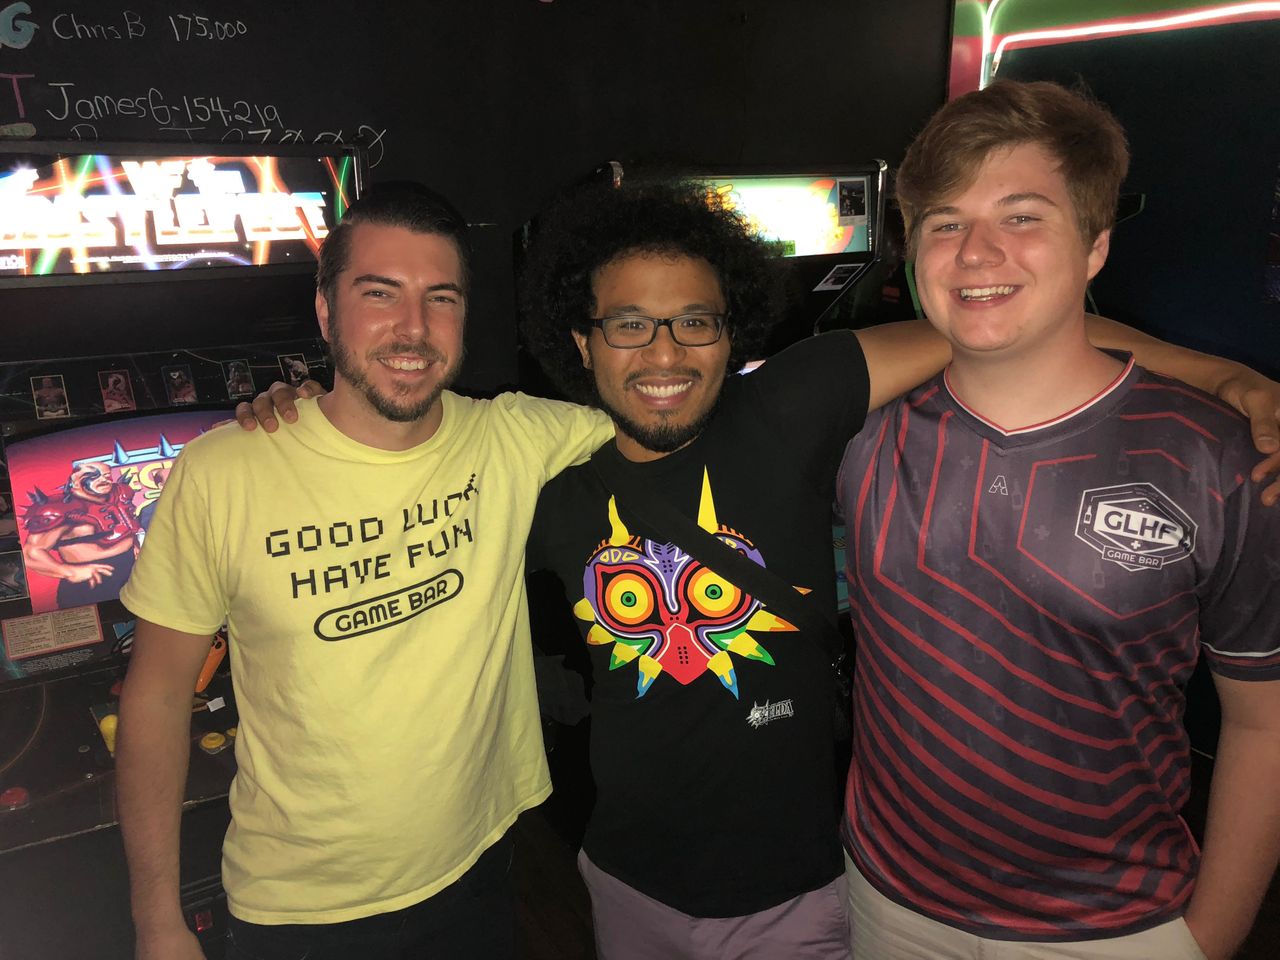 From left to right: Kyle Schmisek, Joshua Campbell and Mark Ronan, at Keg & Coin in Jacksonville.